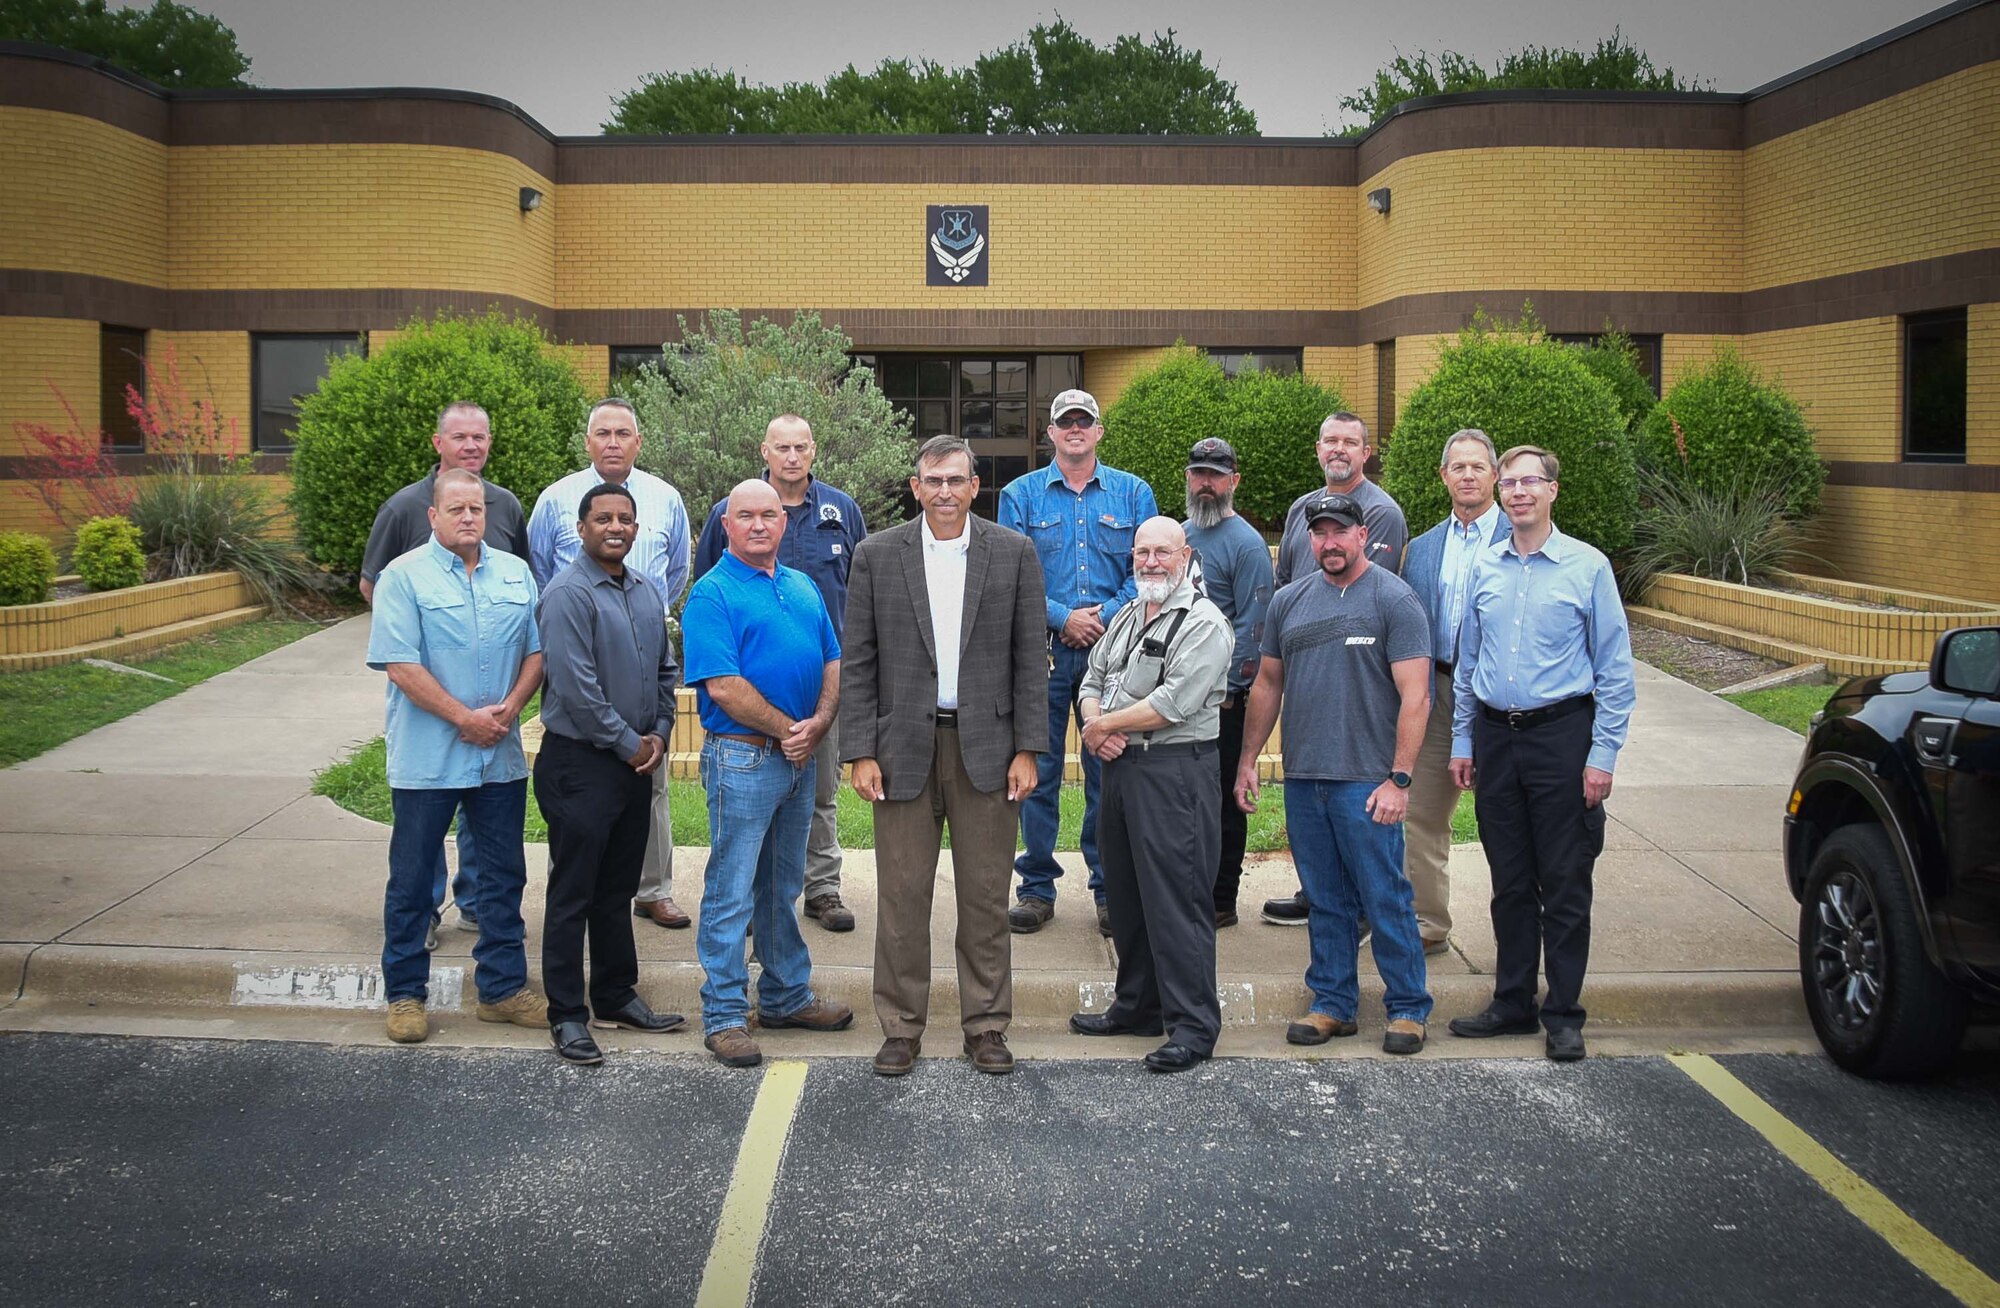 301st Fighter Wing Base Civil Engineers stand in front of the wing's civil engineer squadron building at U.S. Naval Air Station Joint Reserve Base Fort Worth, Texas on March 10, 2021. BCE consists of 17 people from across two sections—engineering and operations. They currently support the installation, the 301 FW's F-16 Fighting Falcon mission and are preparing for the wing's new mission as the Air Force Reserve Command's first F-35A Lightning II unit. (U.S. Air Force photo by Senior Airman William Downs)